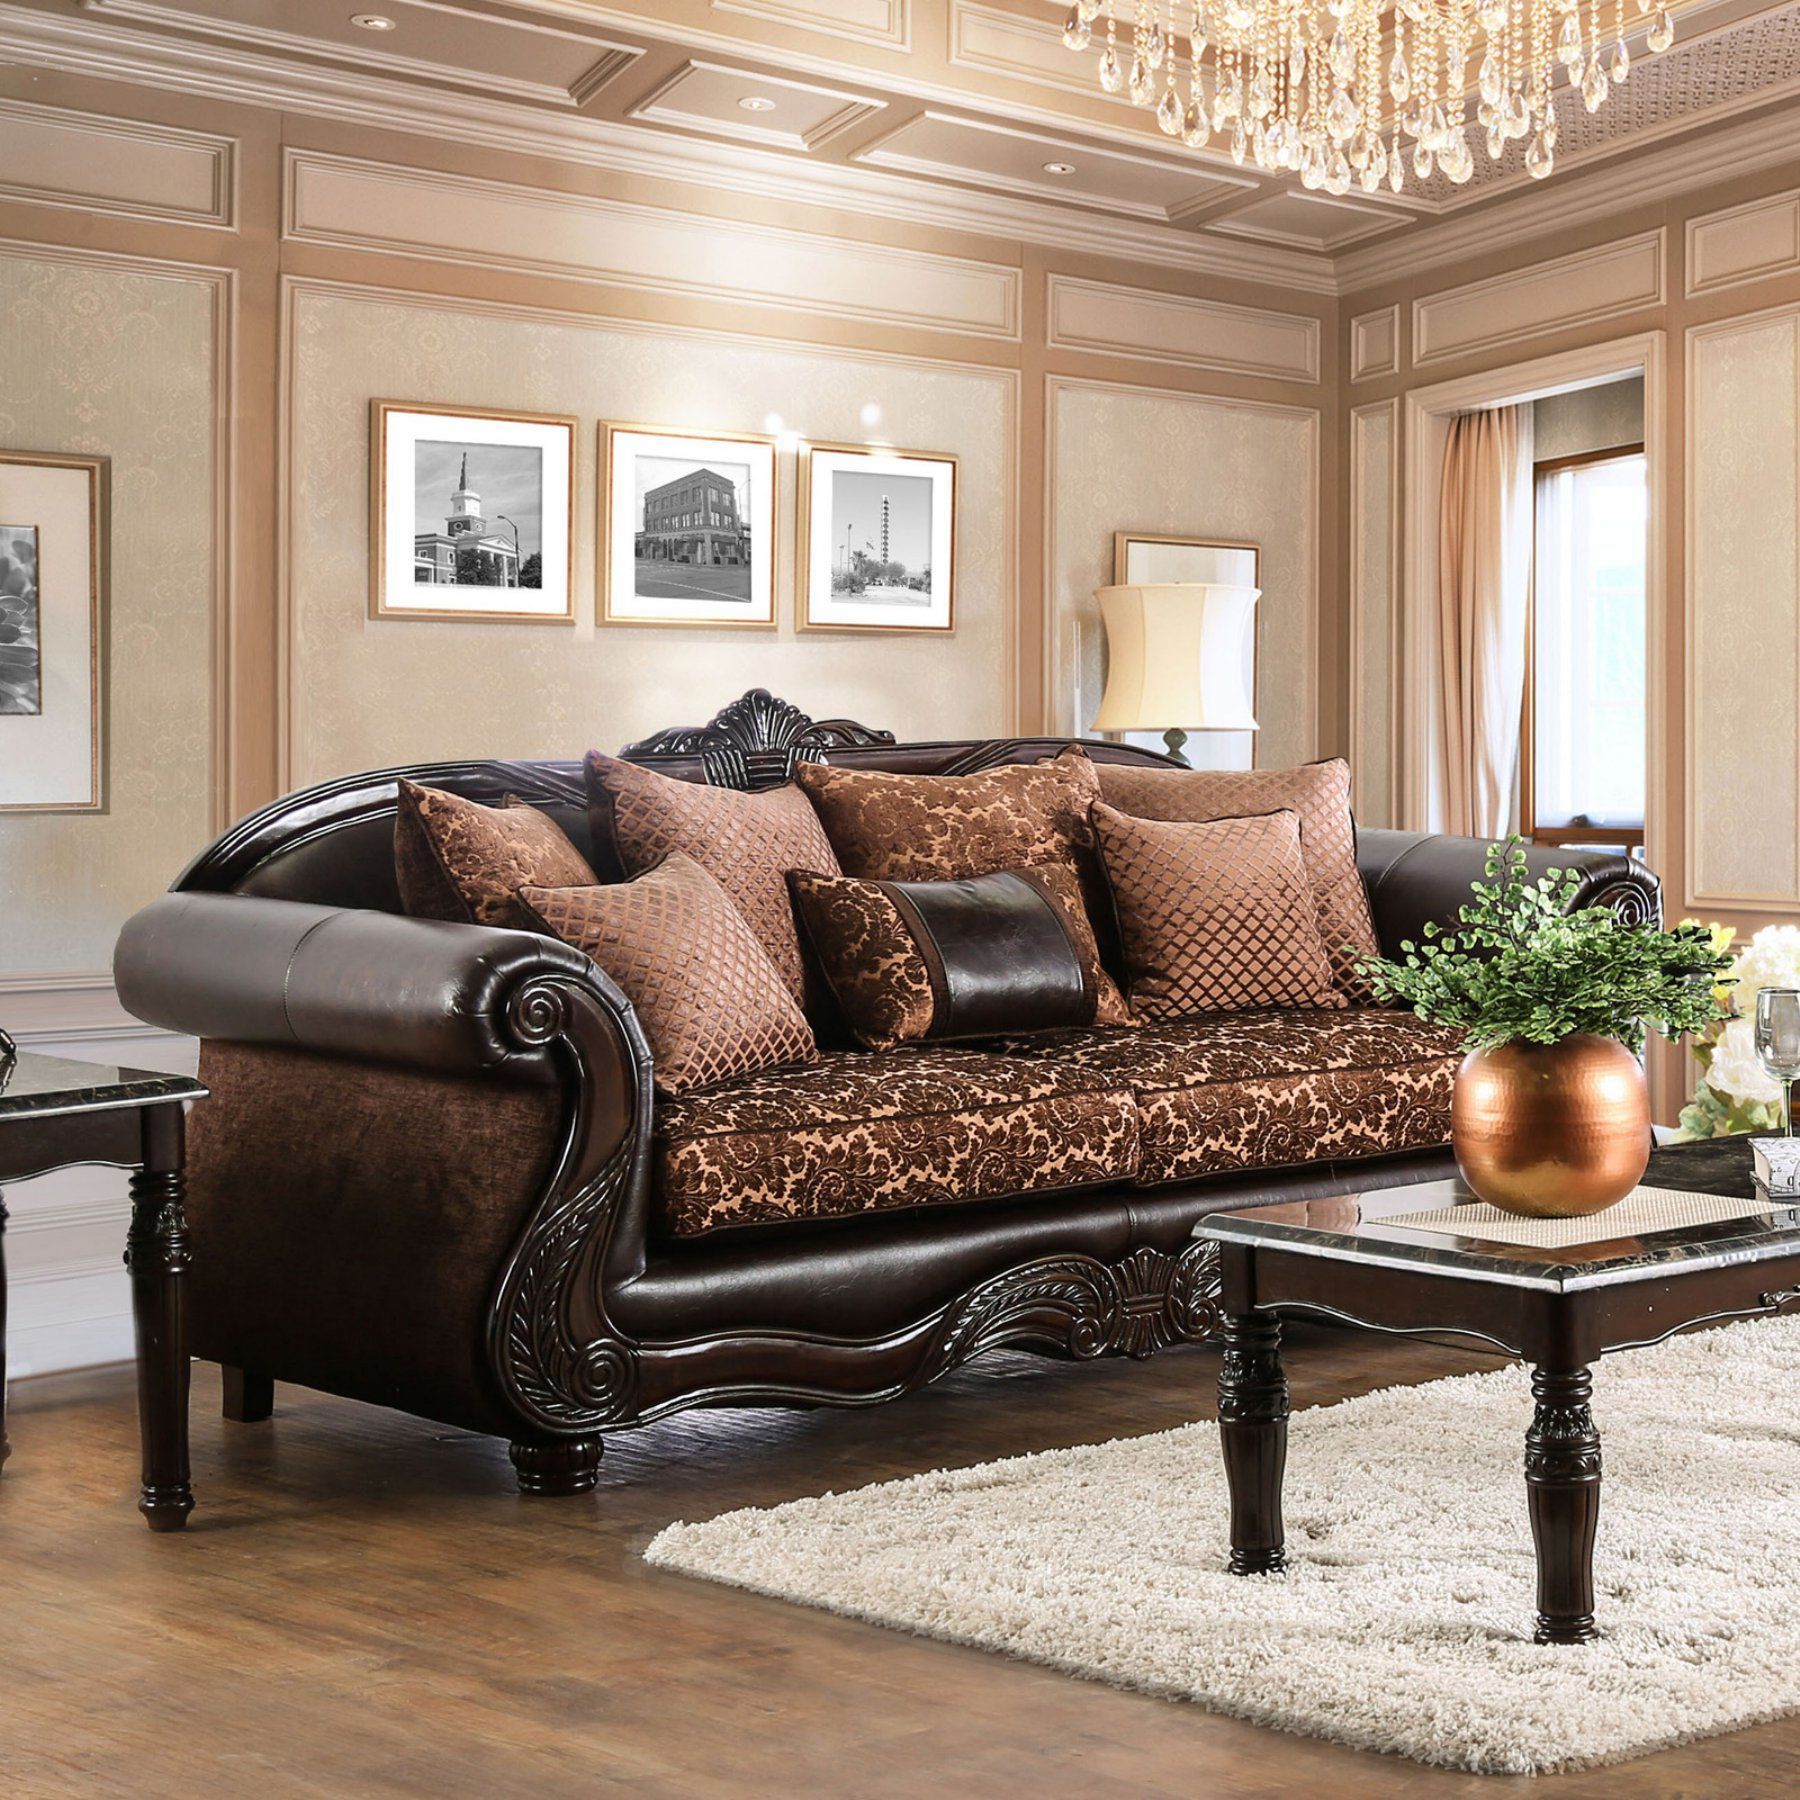 Furniture Of America Maldino Traditional Style Intricate Wood Carved Within Sofas With Pillowback Wood Bases (Gallery 5 of 20)